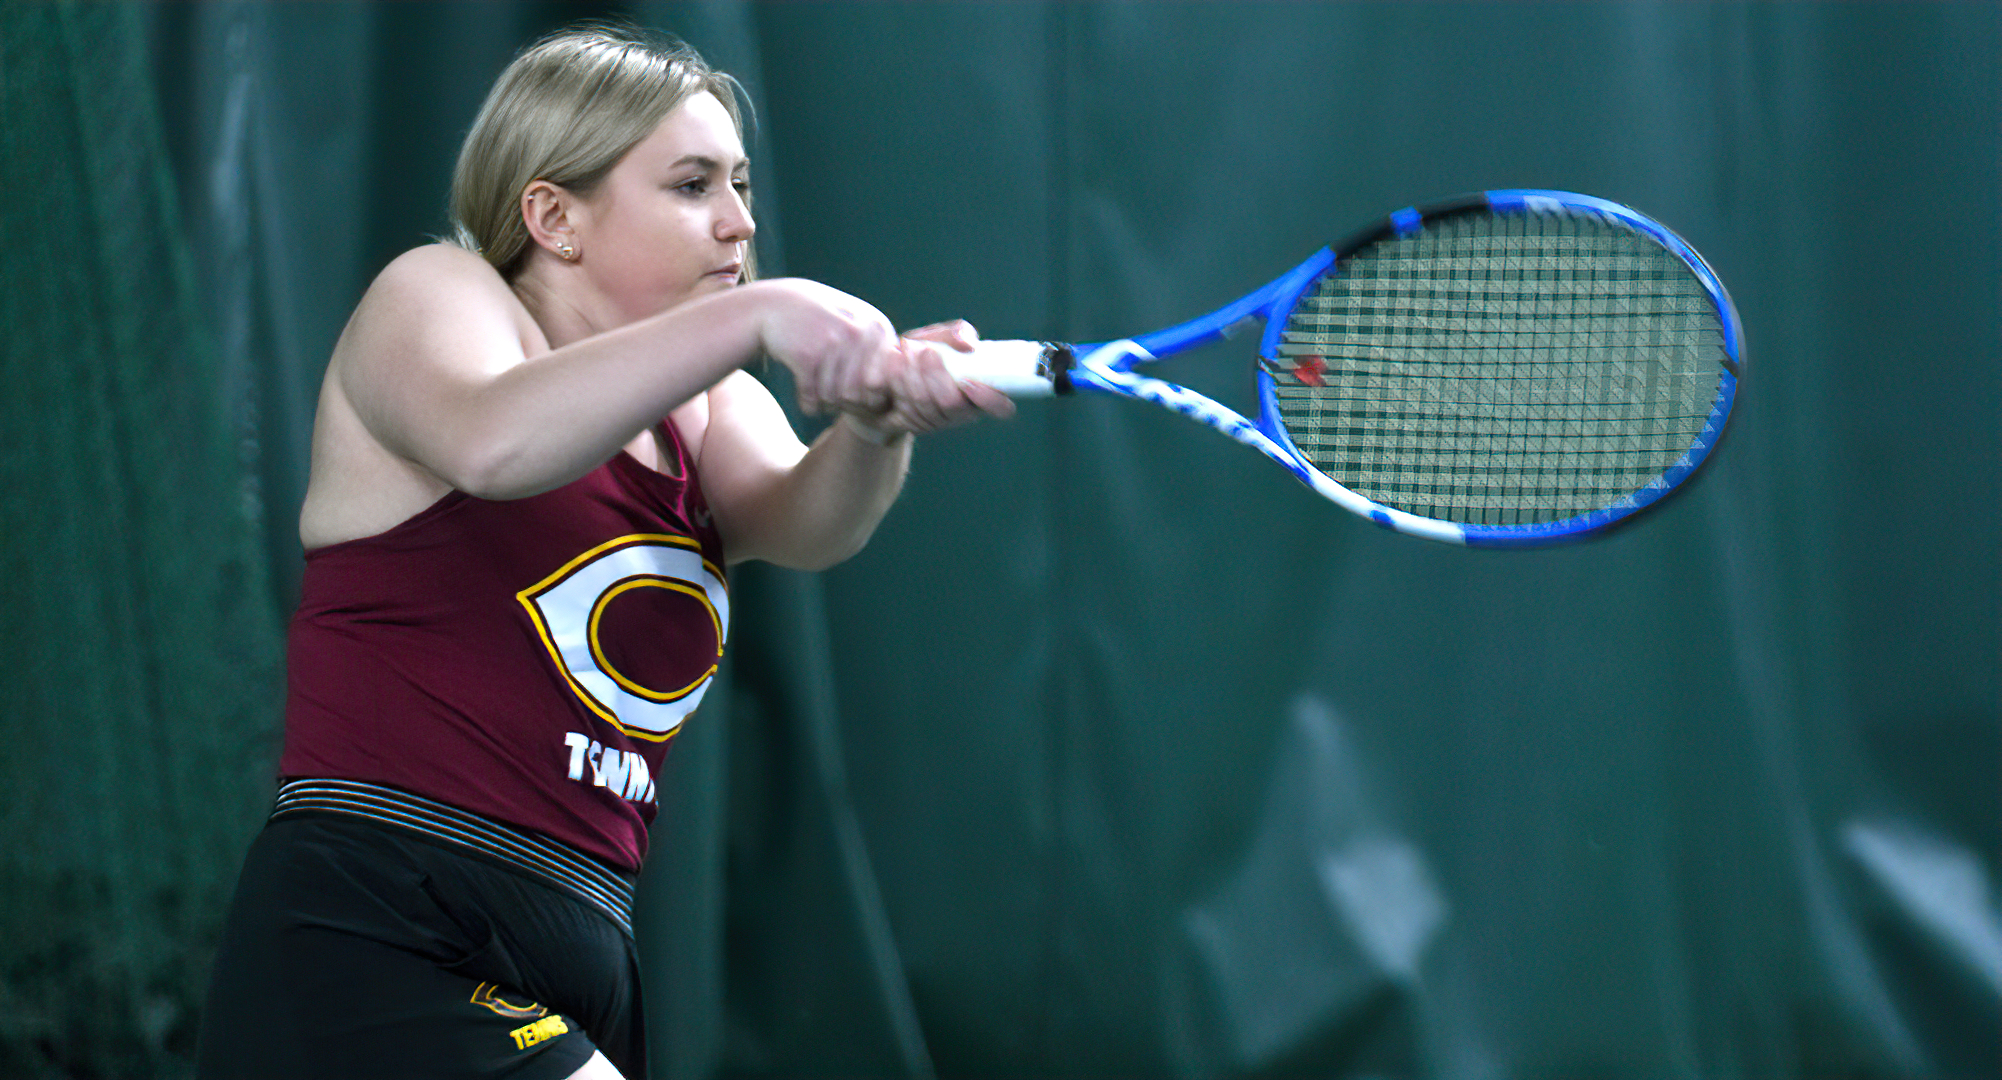 Senior Abby Westrum hits a backhand winner down the line during her singles match vs. Macalester. She won both her singles and doubles matches.